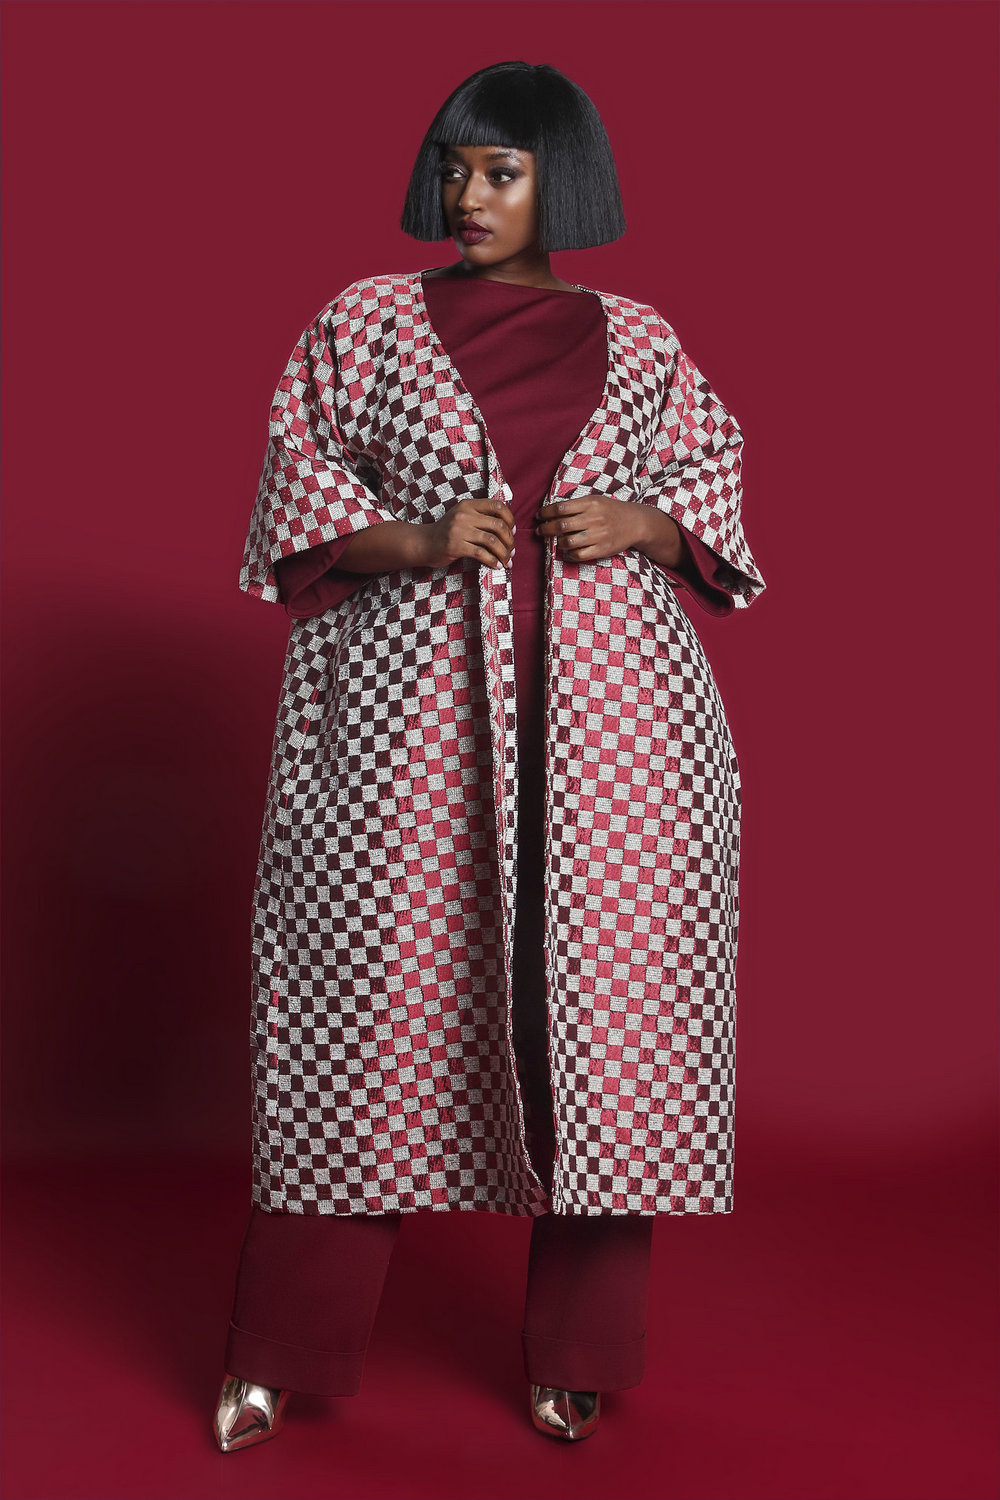 Plus SIze Holiday Style- The 2018 Jibri Holiday Collection